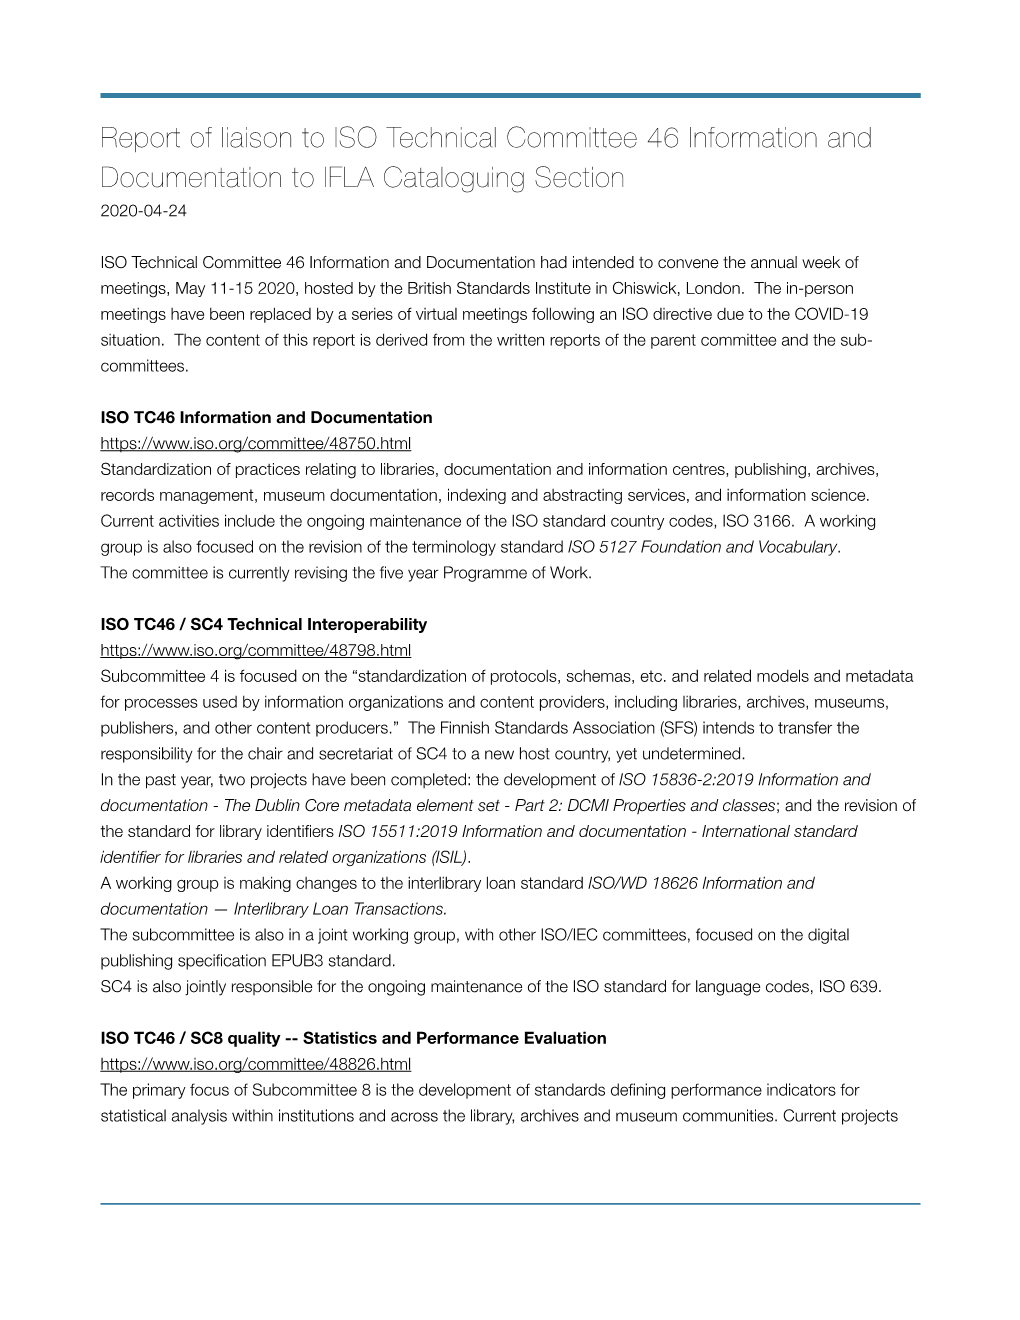 ISO TC46 to IFLA Cataloguing Section 2020 April